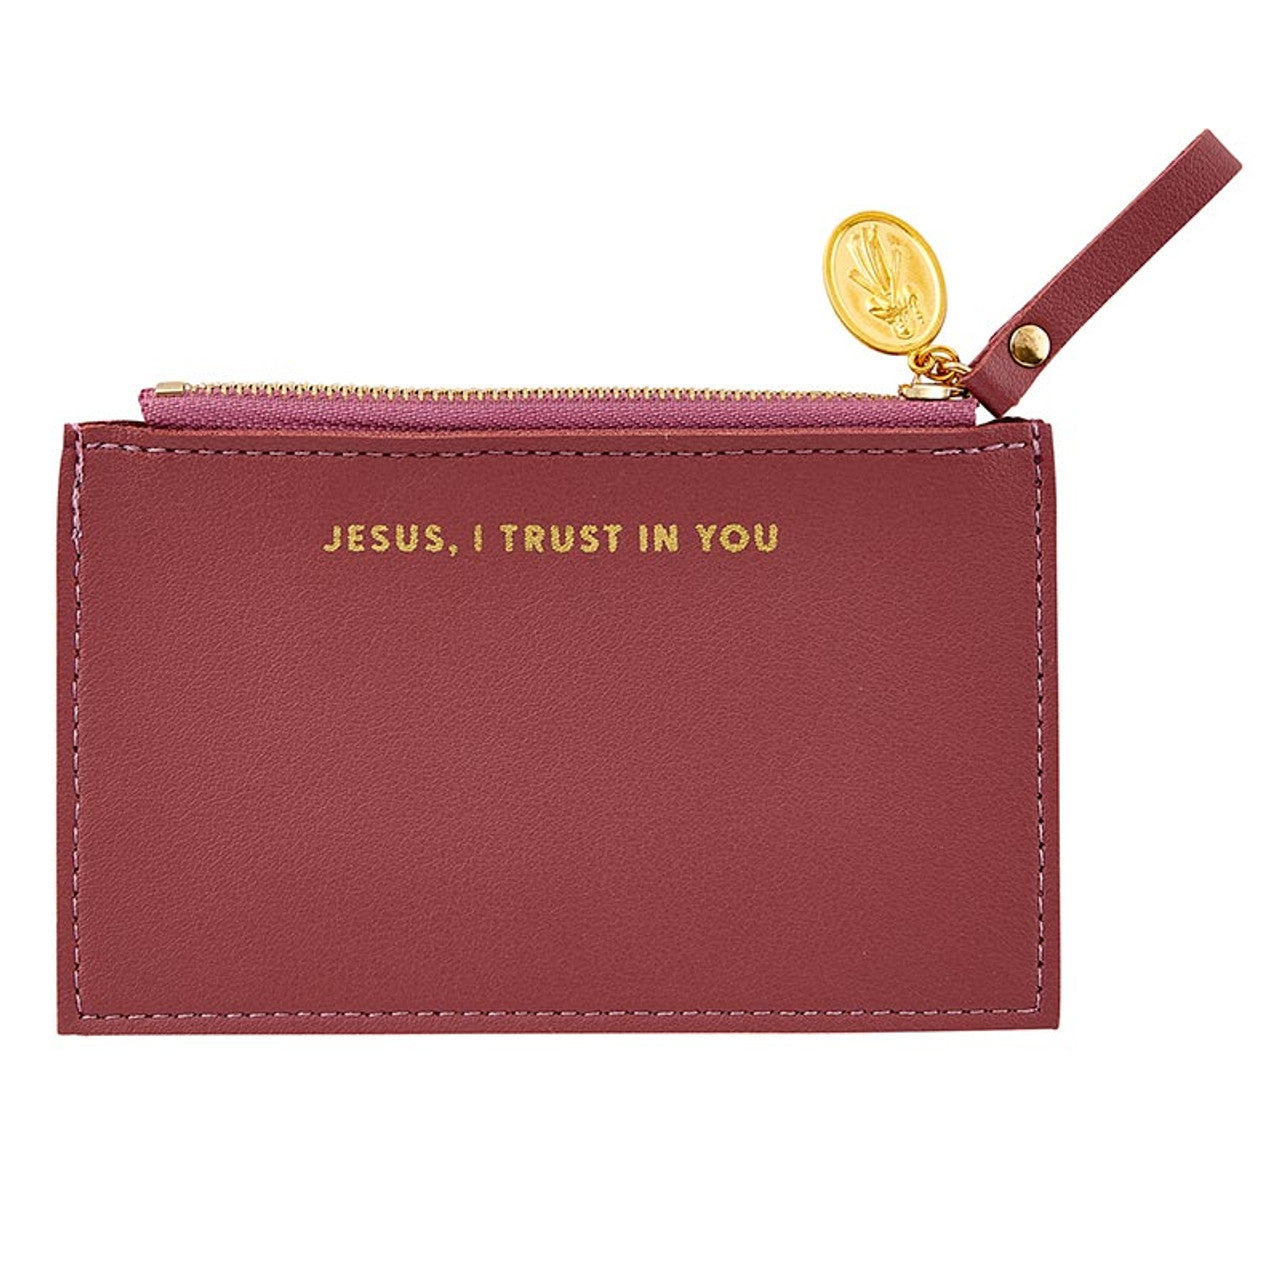 "Jesus, I Trust in You" Leather Wallet